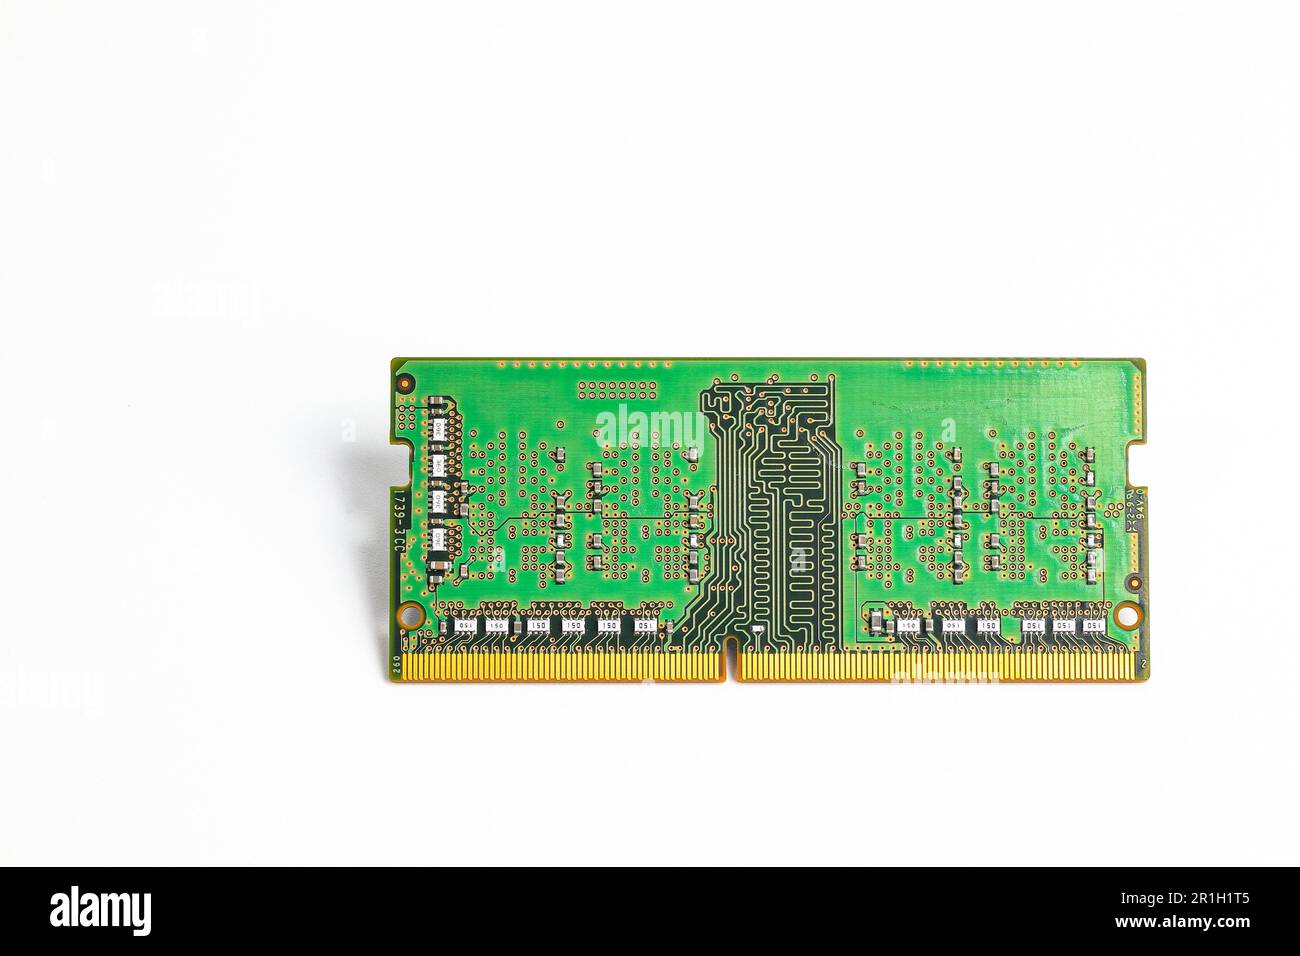 Computer notebook memory module type green color DDR4 isolate on white background. Stock Photo